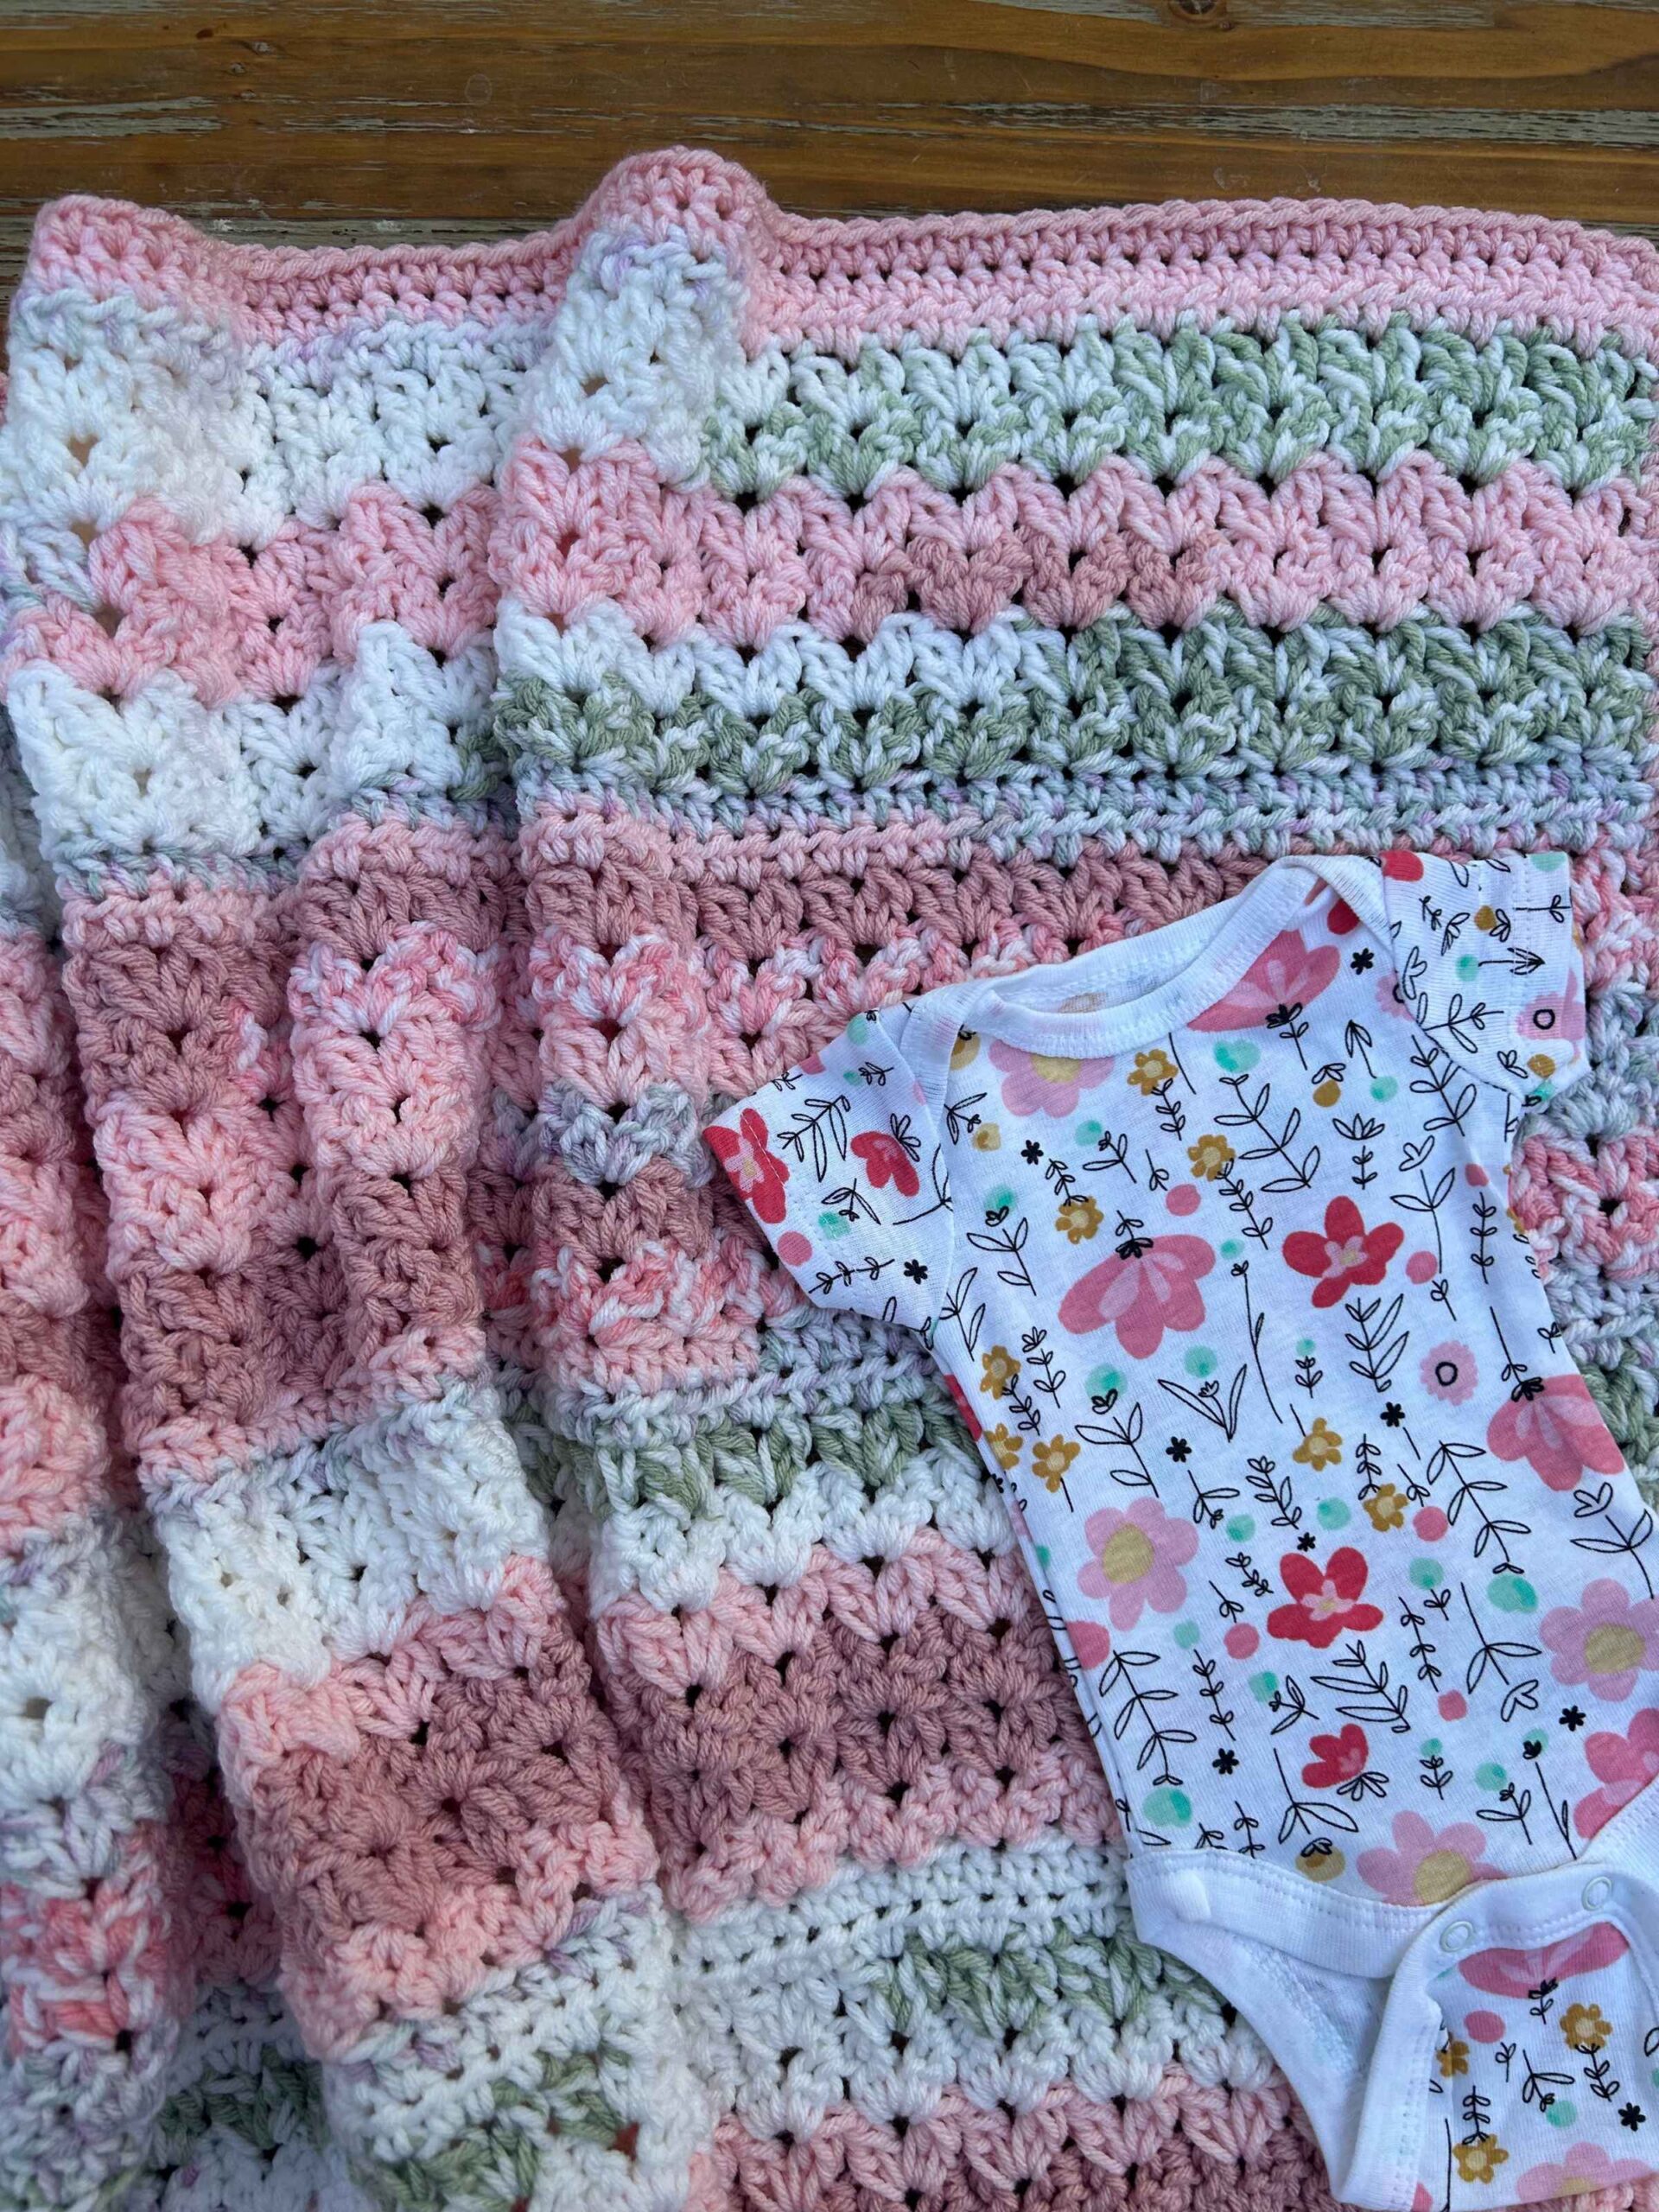 easy baby blanket crochet project with cluster v-stitches using pink, white, and green yarn with flowered baby outfit